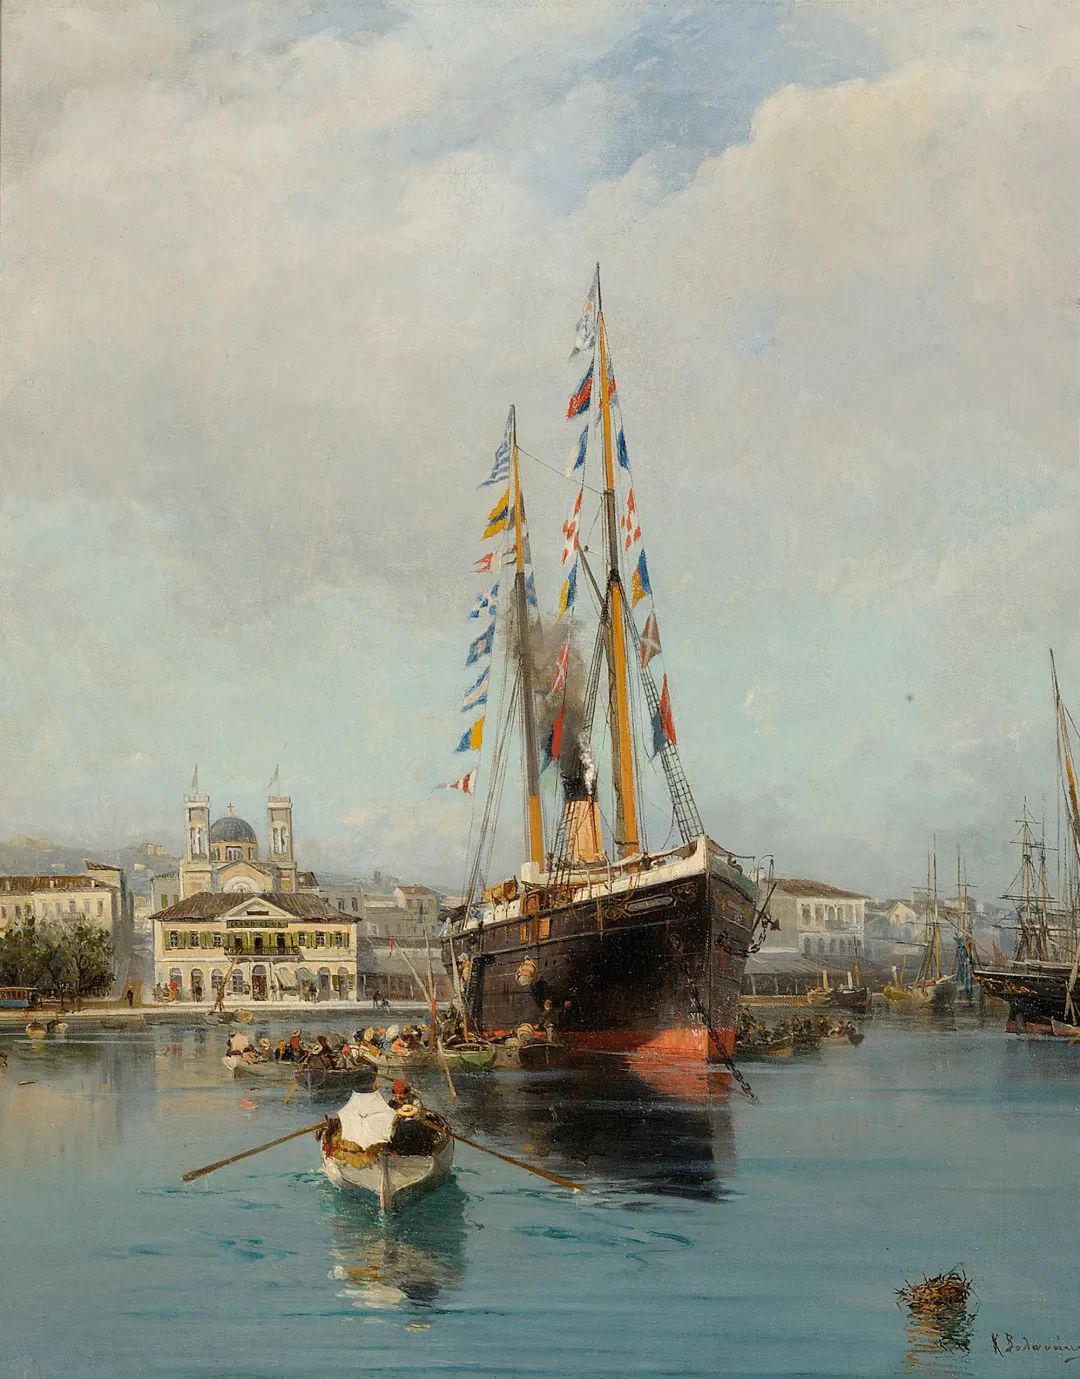 Konstantinos Volanakis (1837-1907), "Sail from Piraeus to Tinos", oil on canvas 64x52 cm, private collection